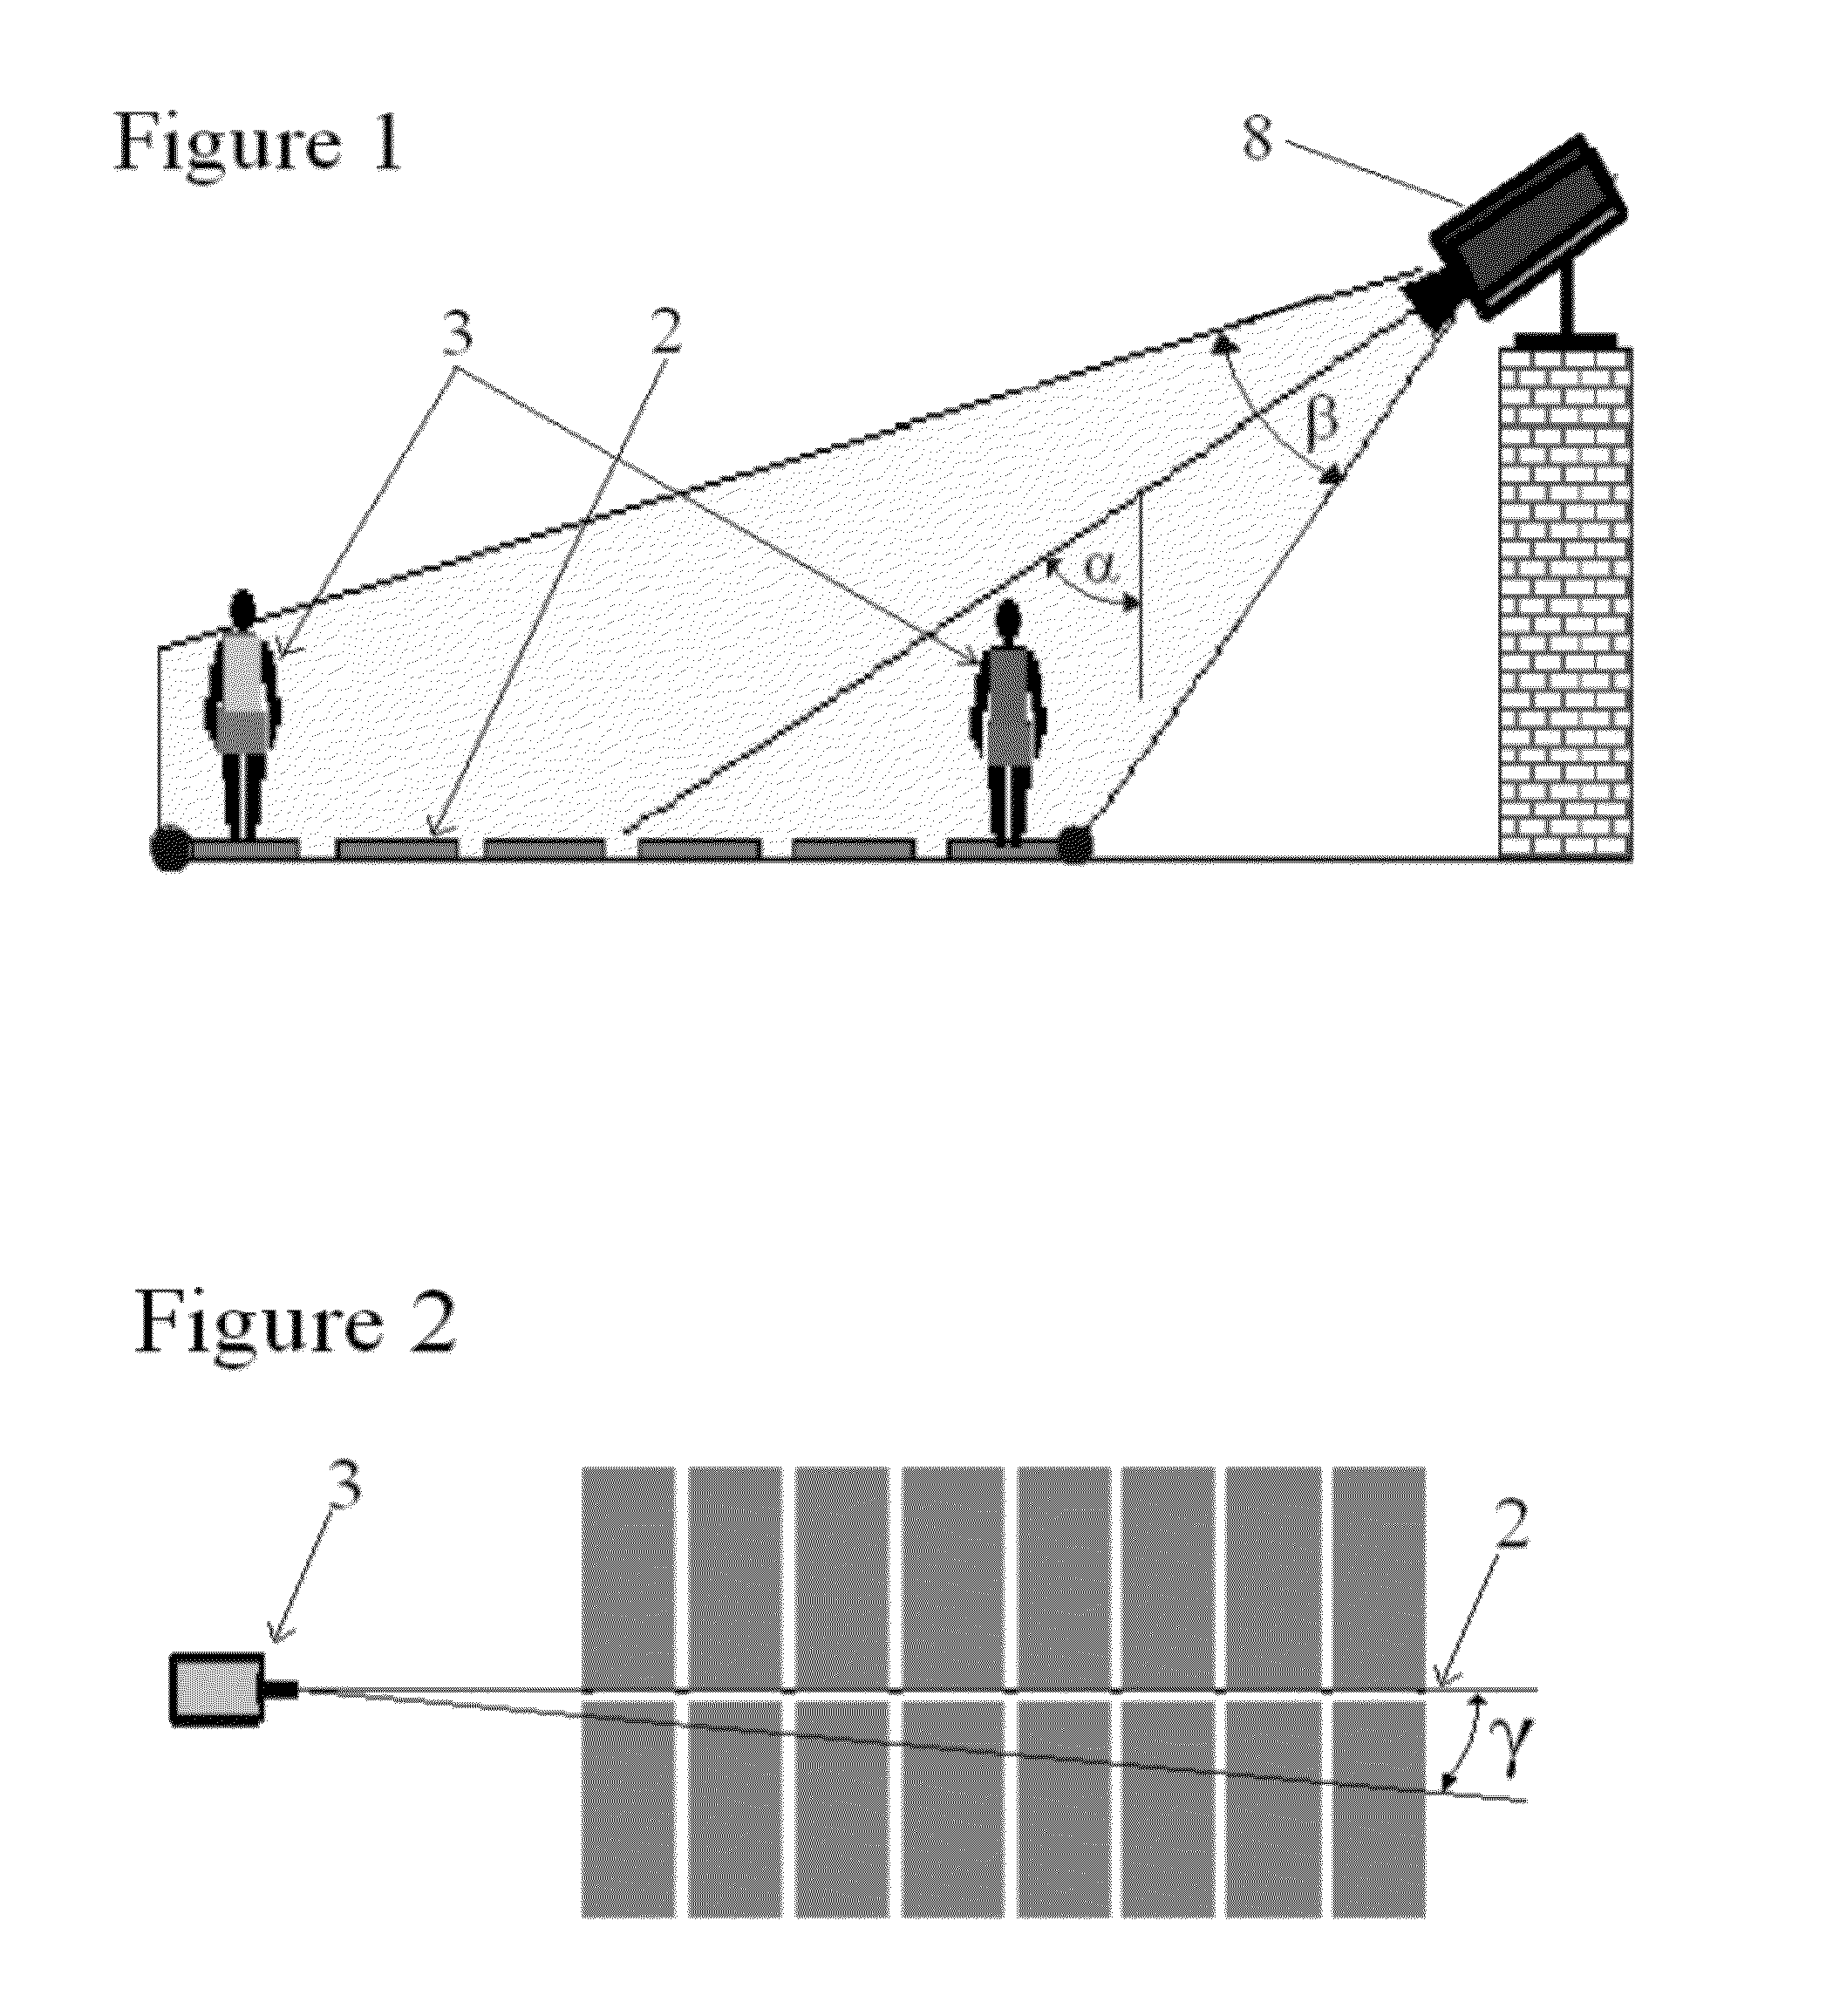 System and method of calibrating a system